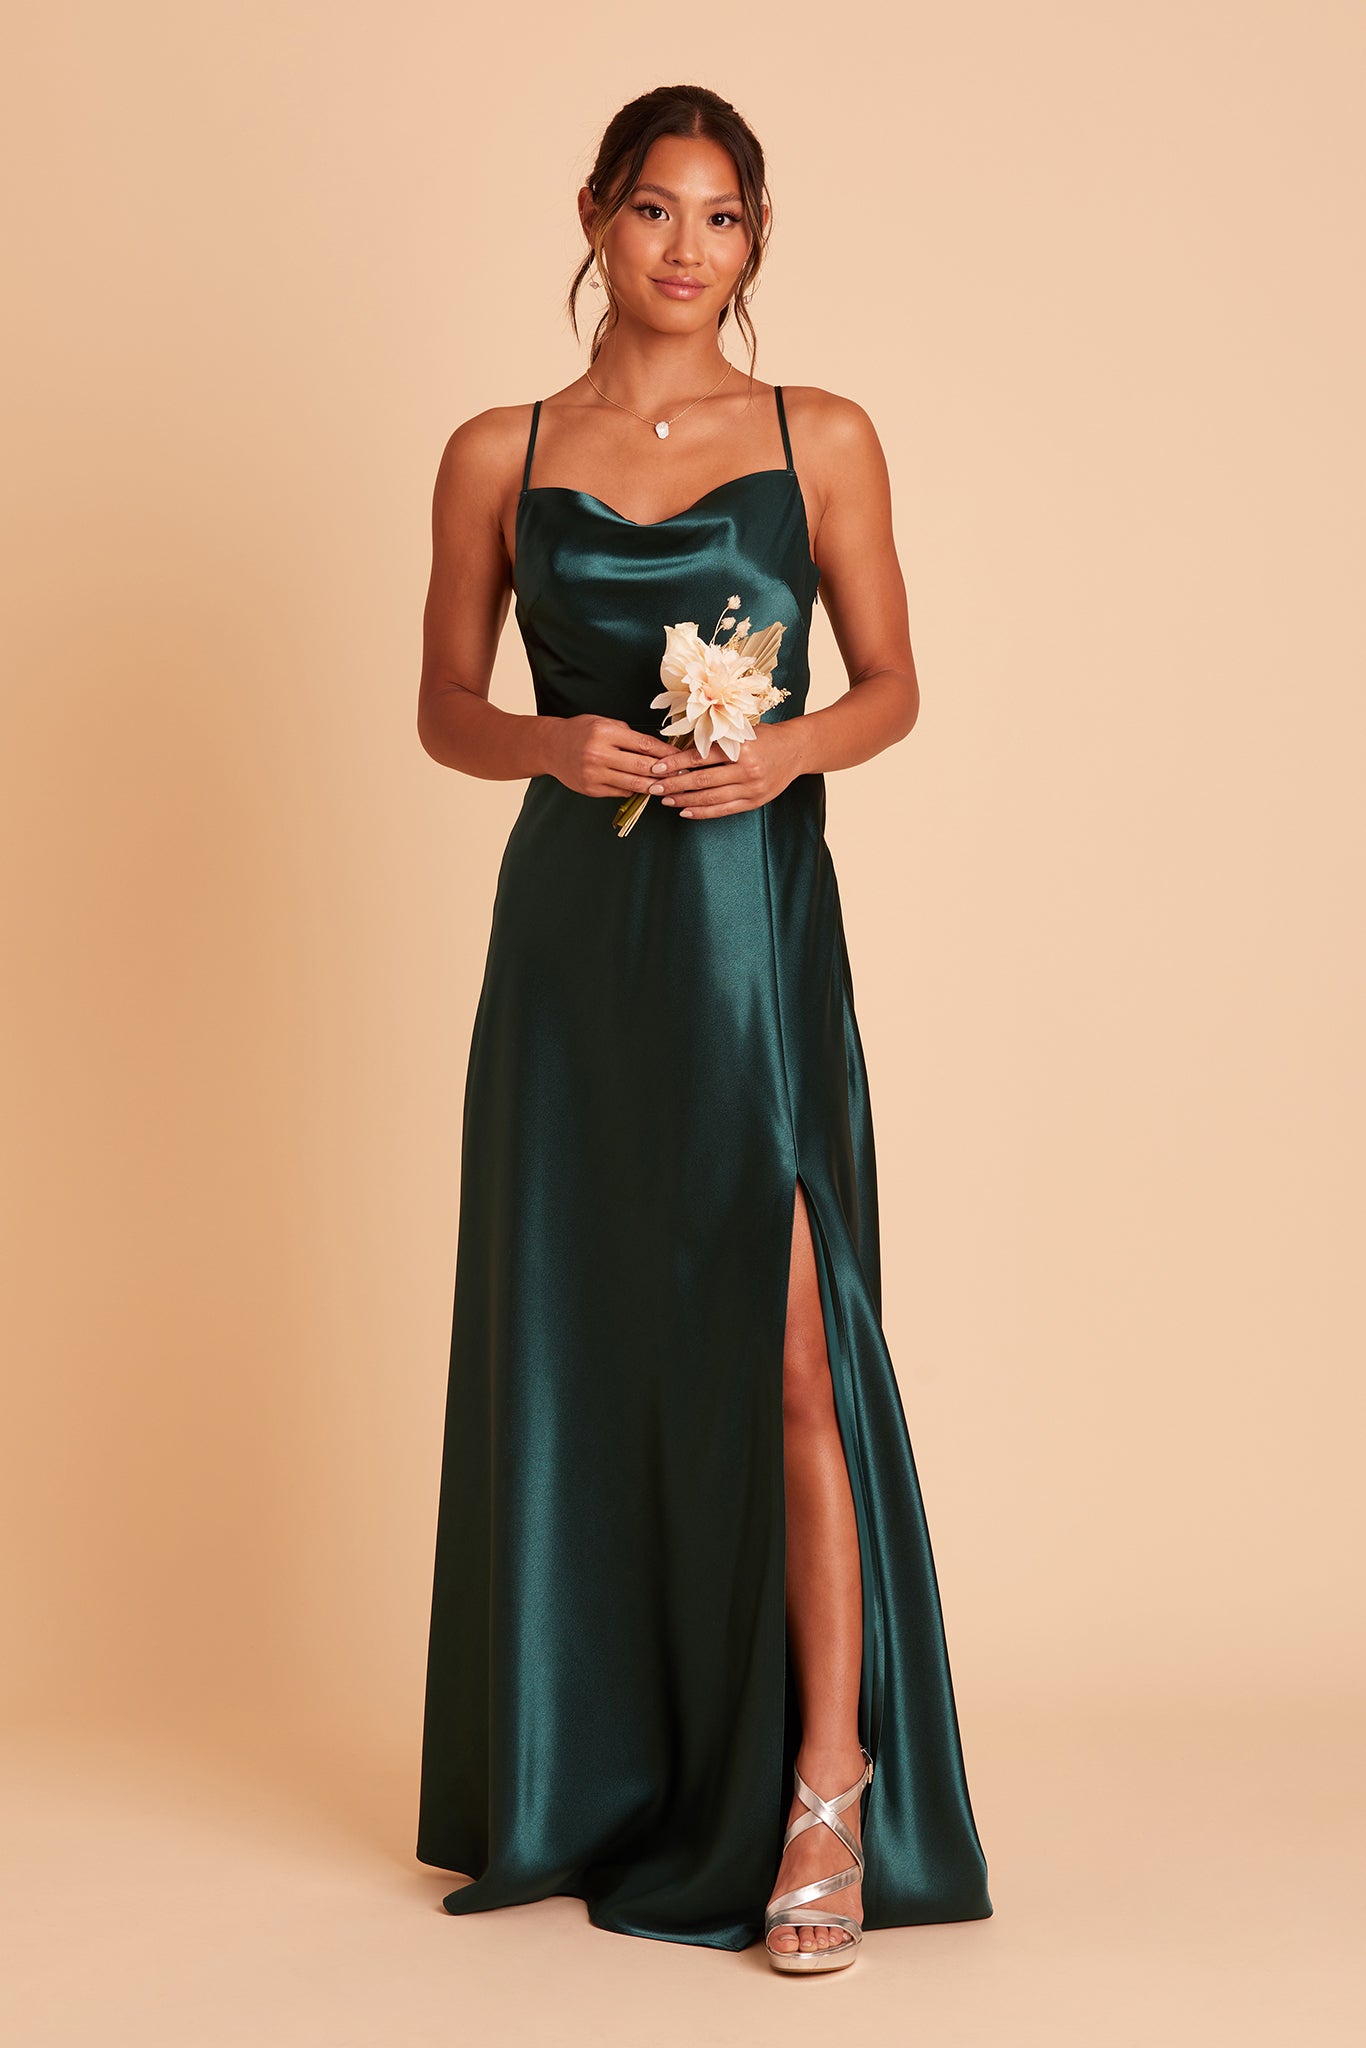 Front view of the Lisa Long Dress in emerald satin shows a model revealing their leg and foot in the mid-thigh slit. They wear the strappy high heel shoes in gold metallic.